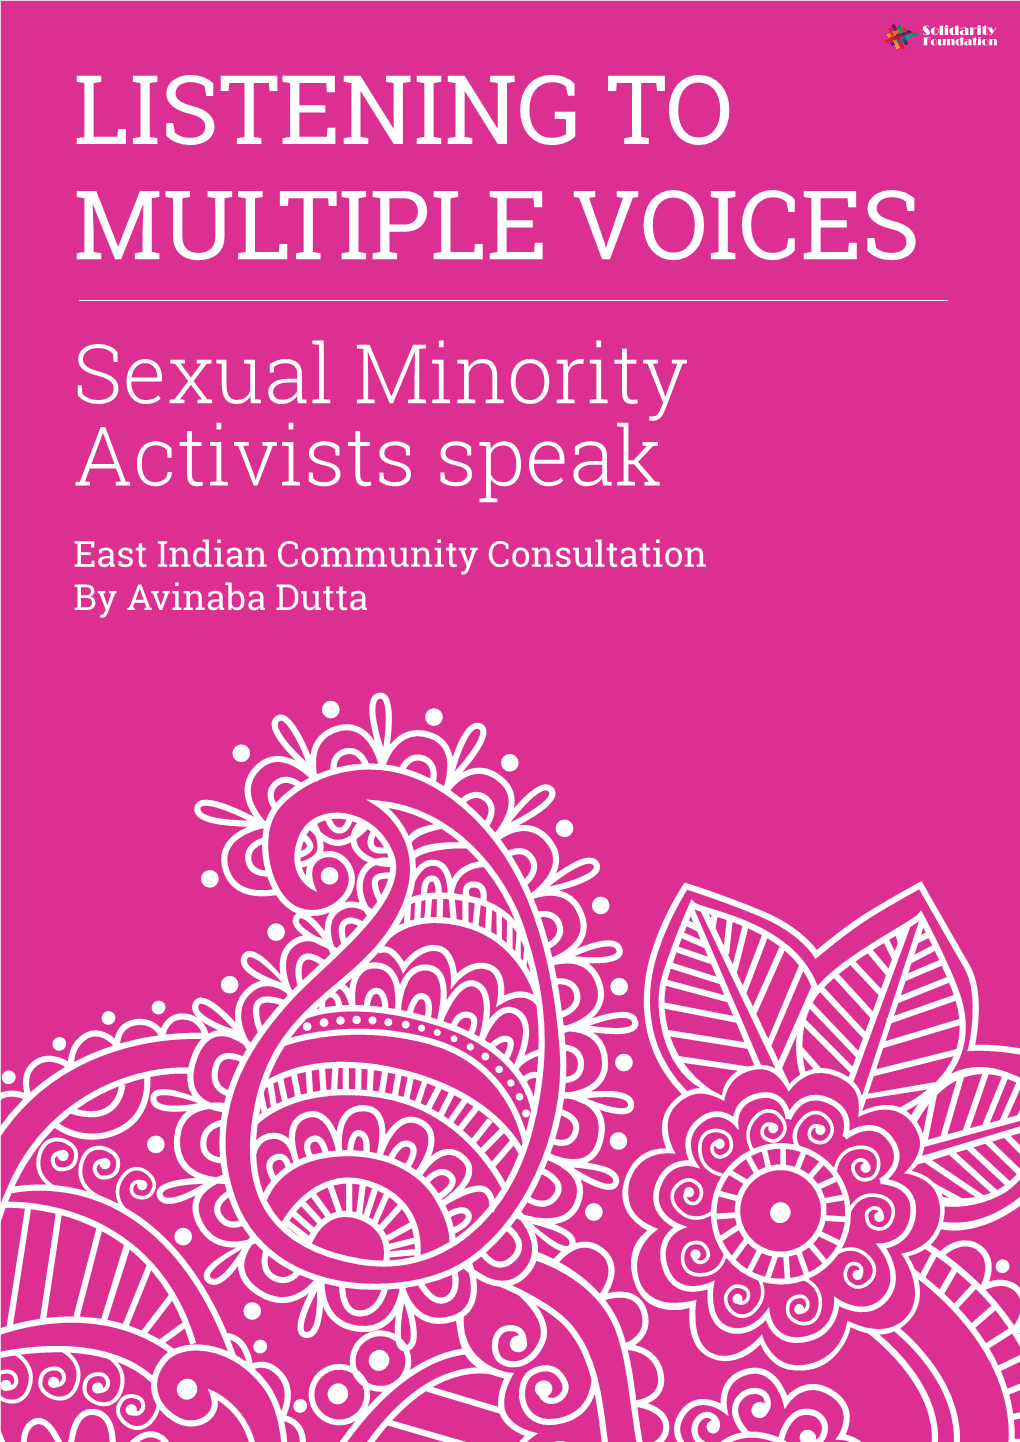 Eastern India Queer Community Consultation on Social